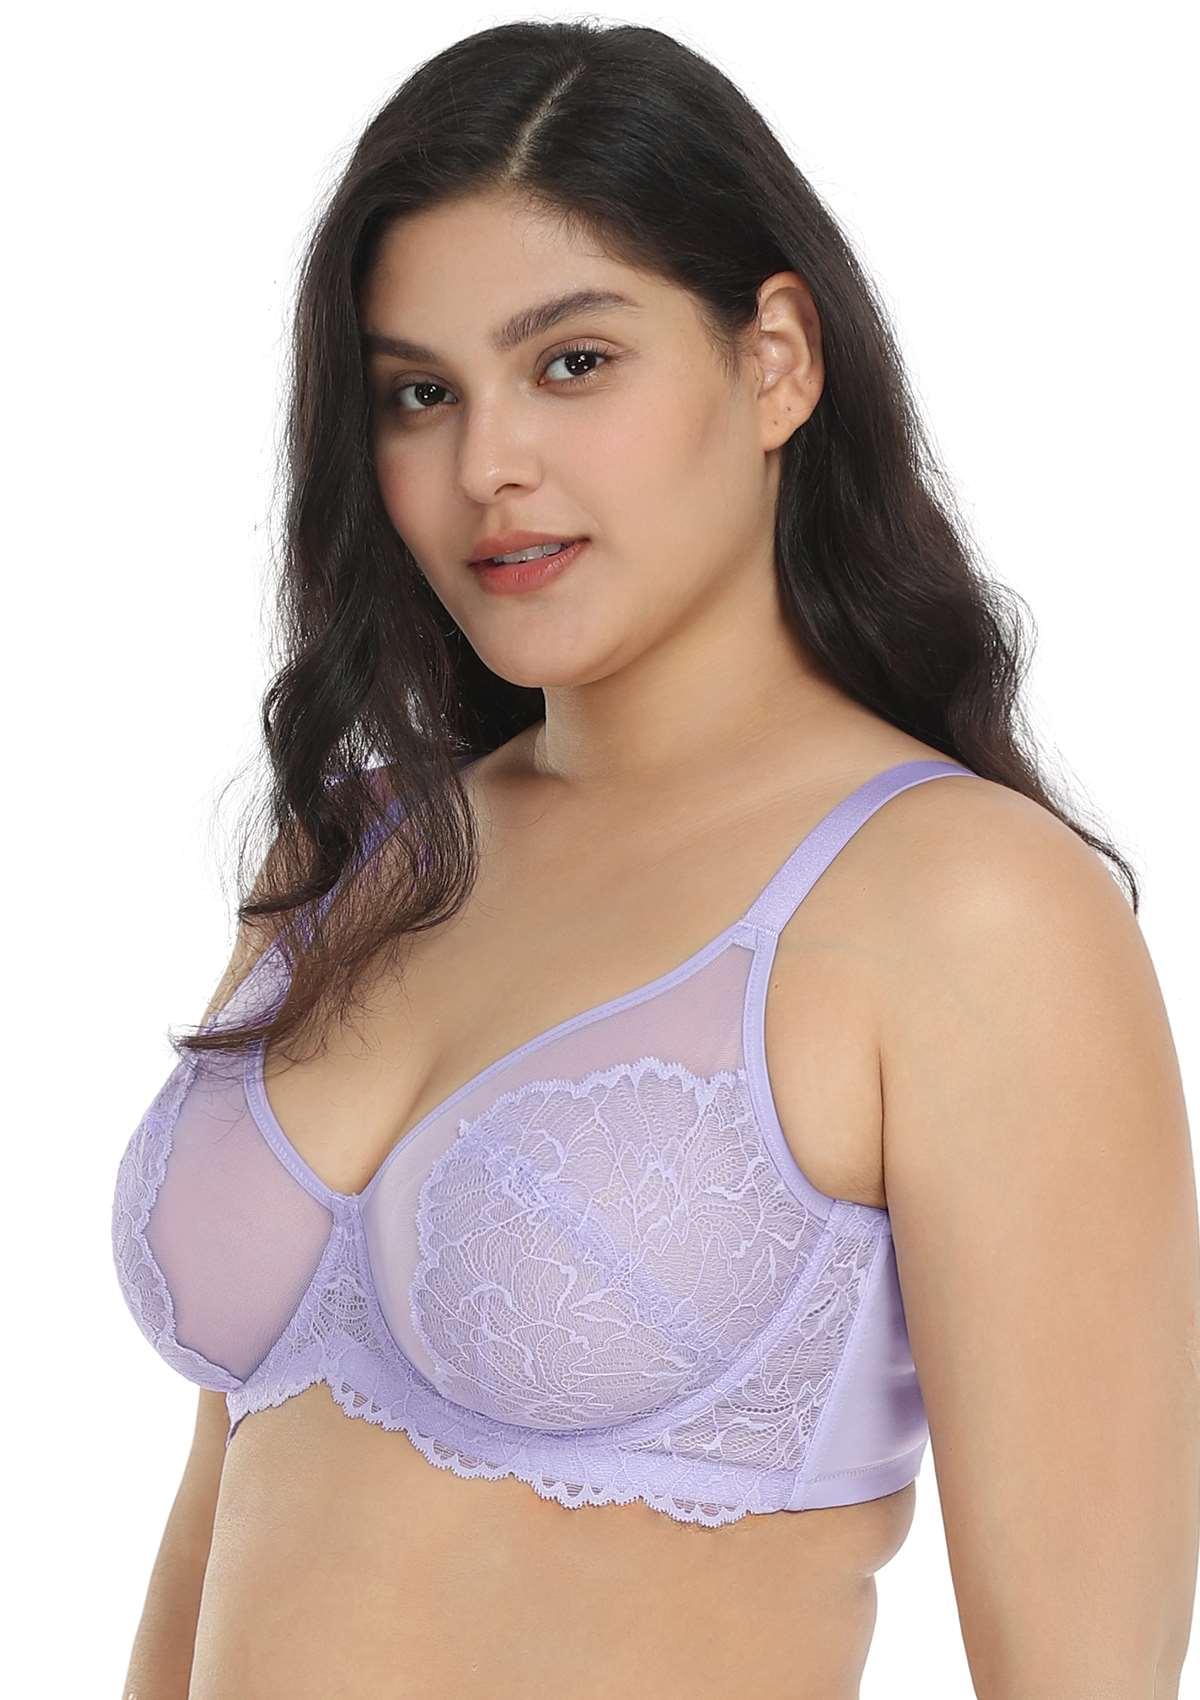 HSIA Blossom Transparent Lace Bra: Plus Size Wired Back Smoothing Bra - Light Purple / 42 / H